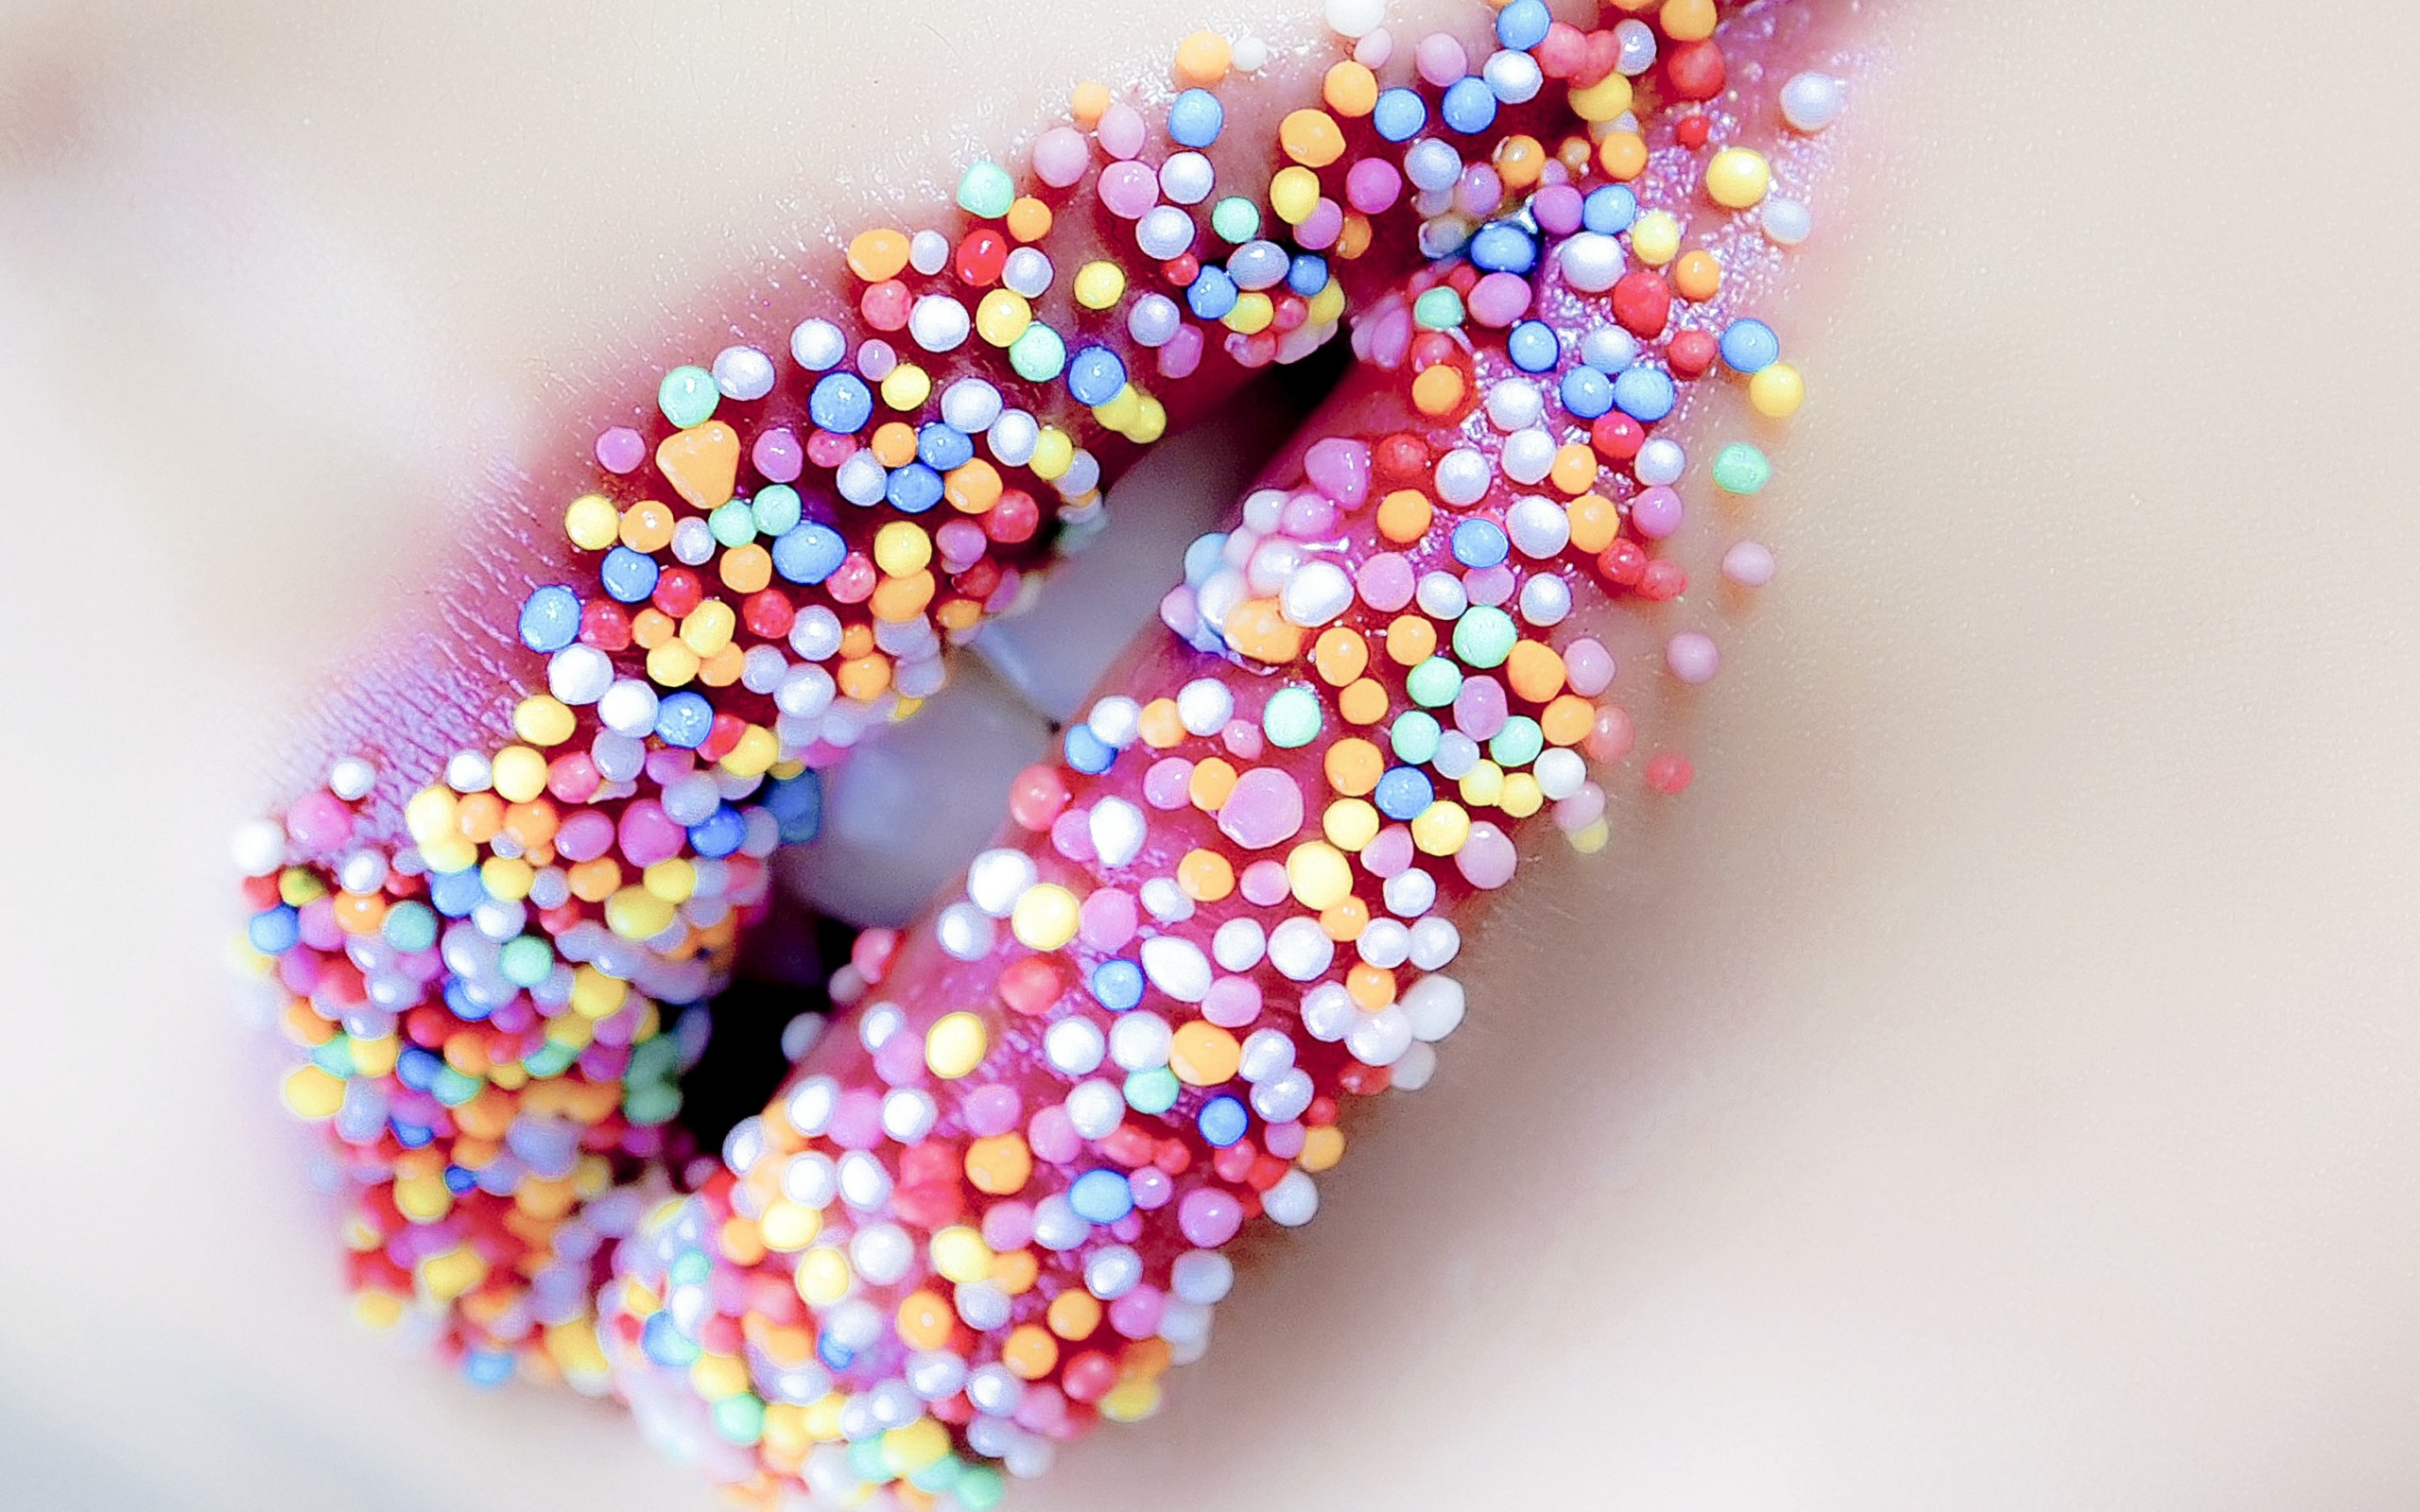 Lips with sweets wallpaper 2560x1600